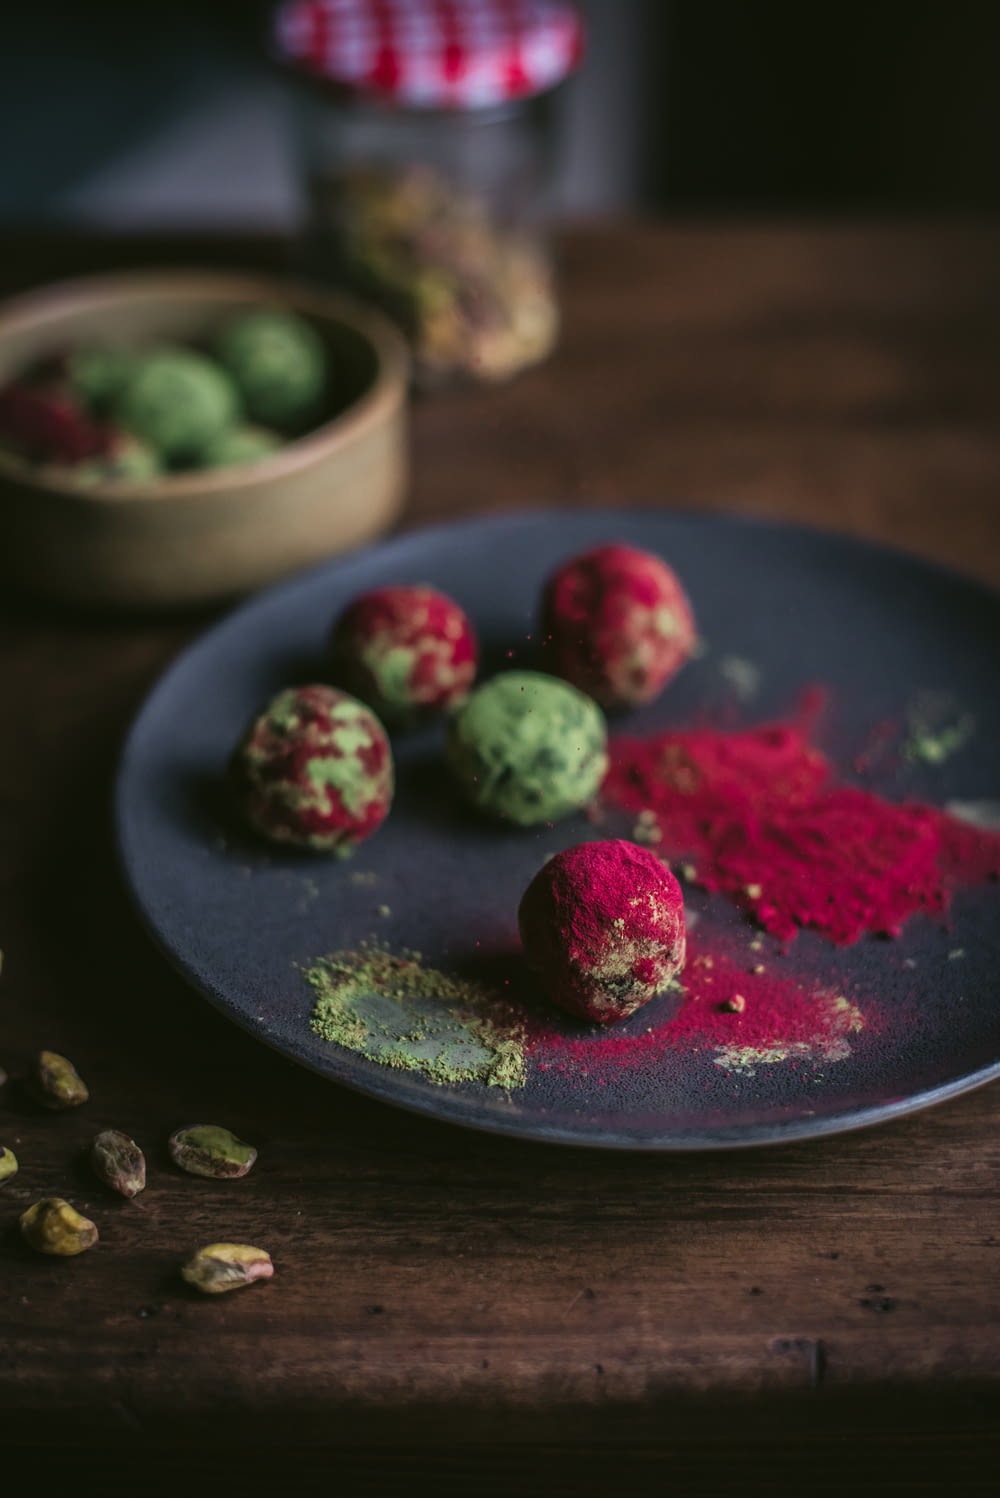 green and red fruits on blue ceramic plate